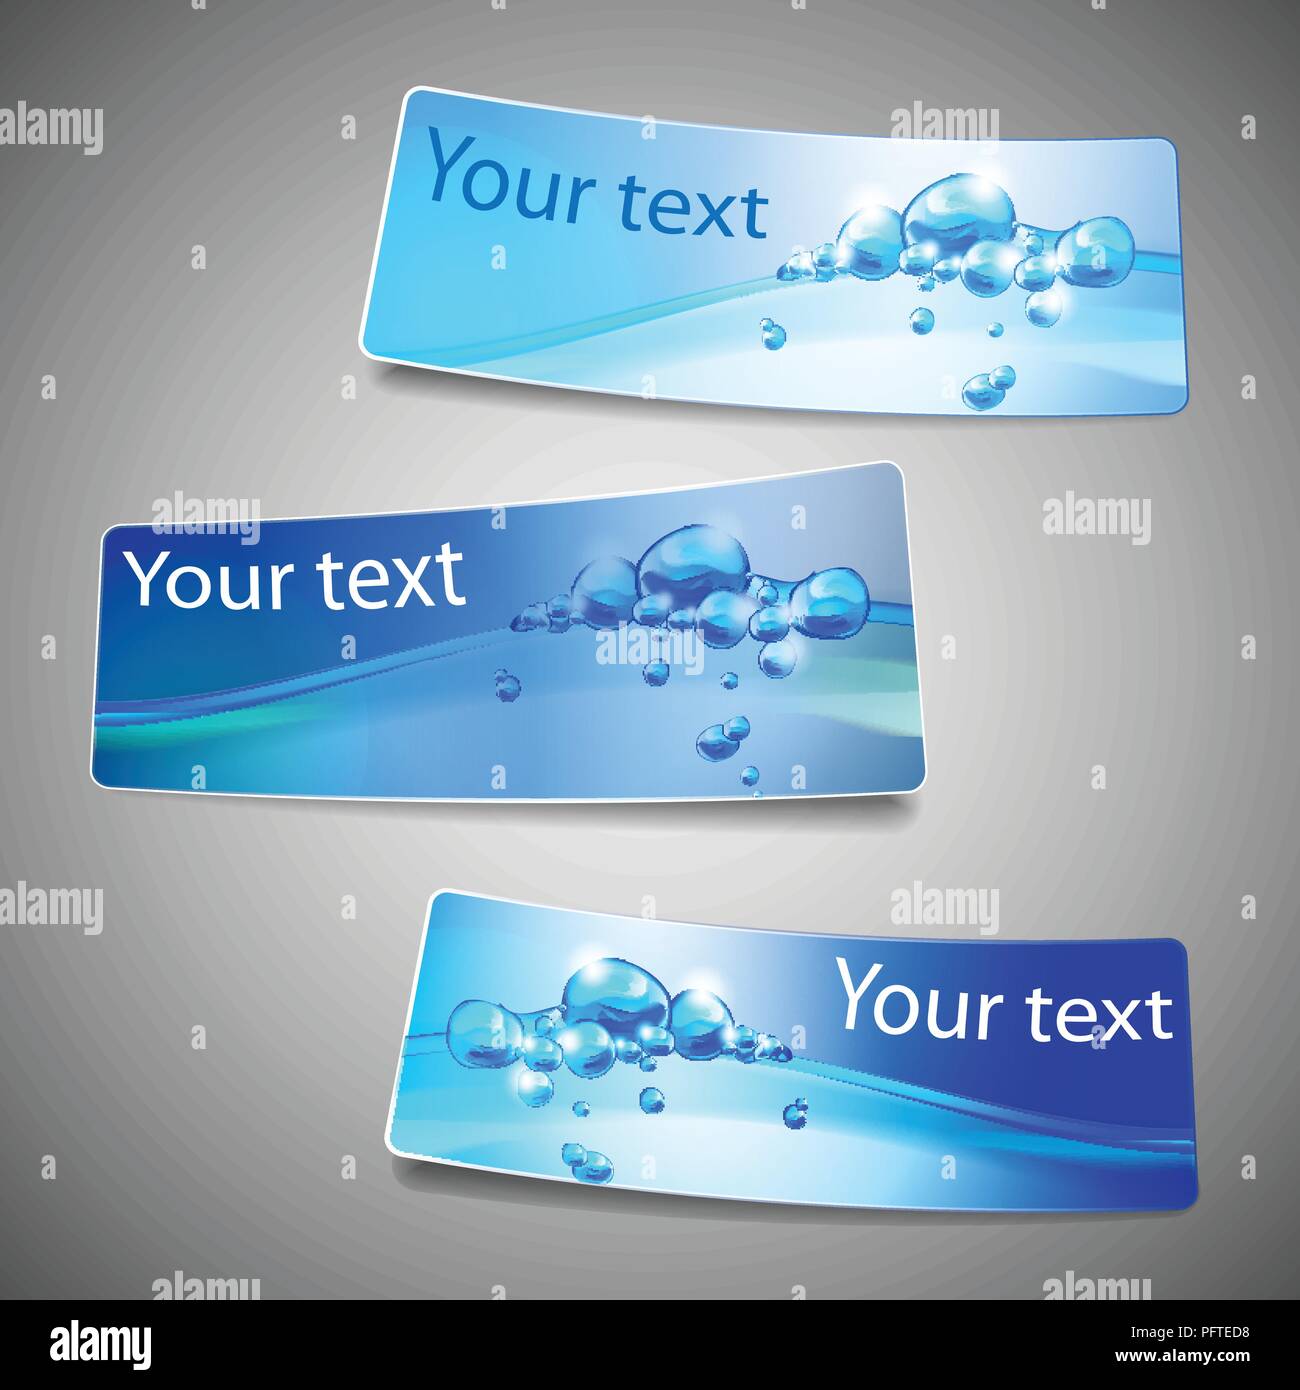 https://c8.alamy.com/comp/PFTED8/set-of-three-colorful-bright-horizontal-paper-cut-out-headers-or-banners-with-abstract-creative-design-blue-bubbly-water-drops-on-waves-vector-PFTED8.jpg